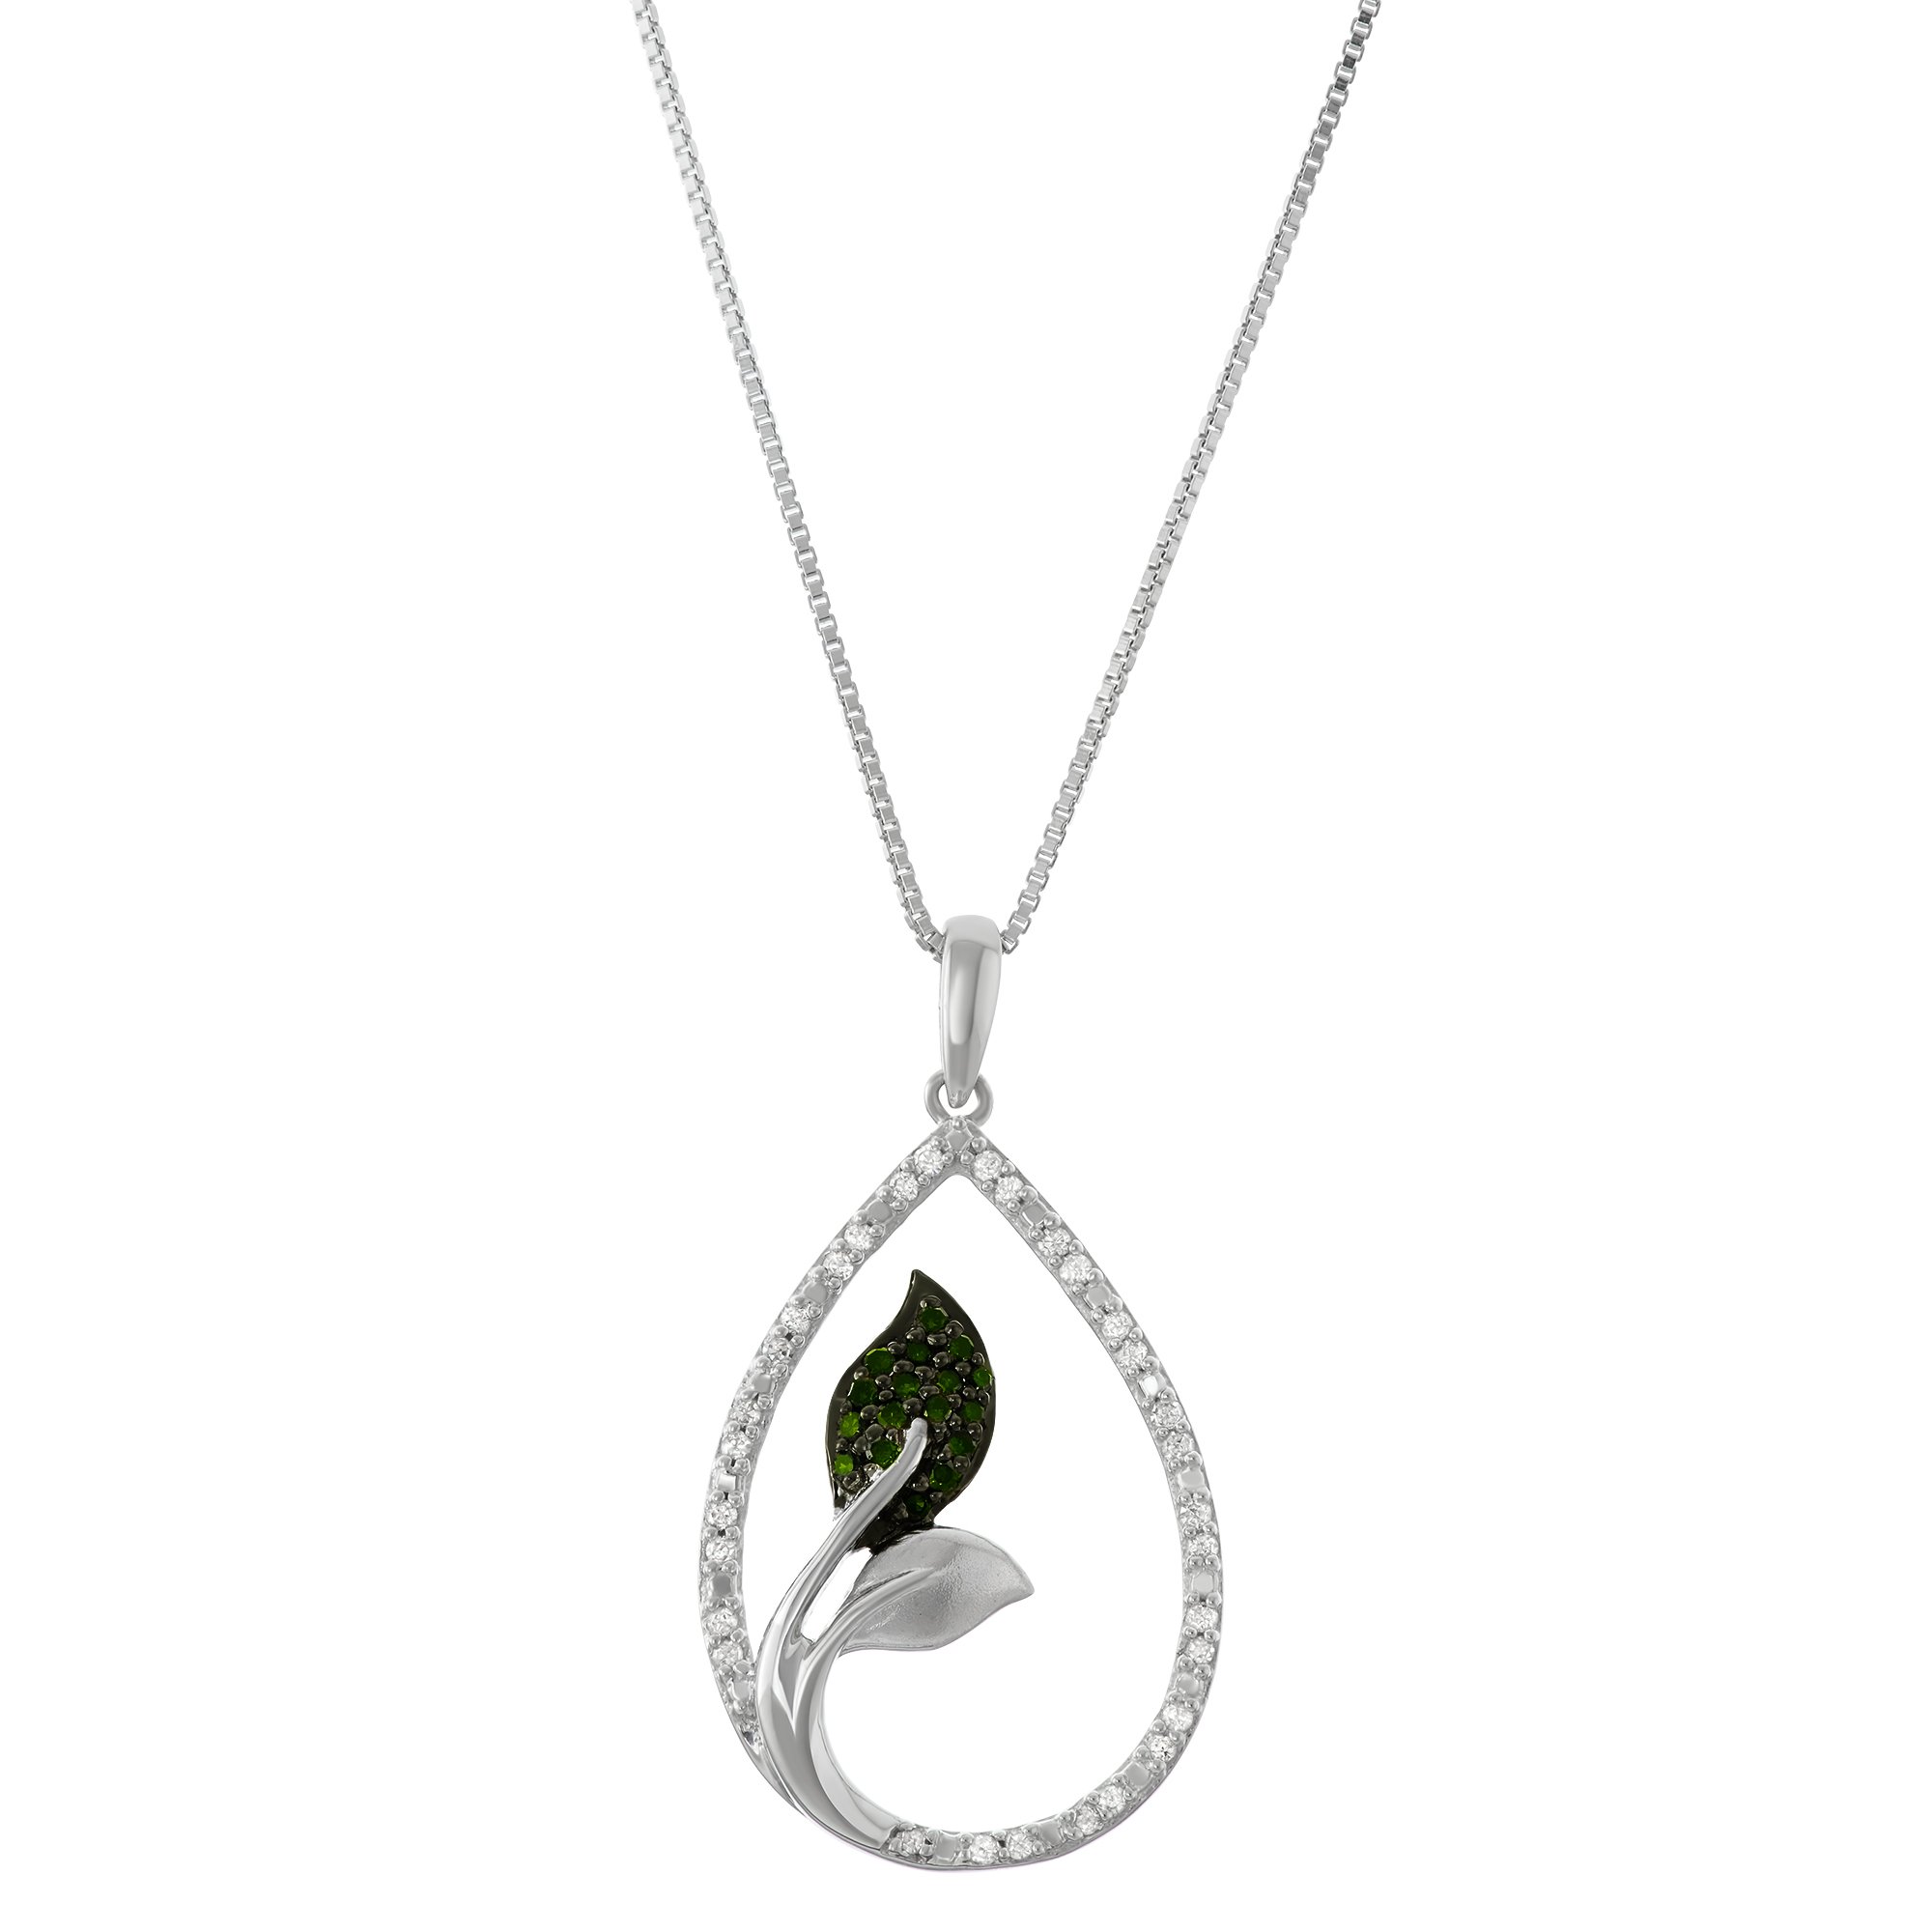 Hdiamonds 1/5 CTTW Drop Pendant with a combination of Diamonds and Green Diamonds in Sterling Silver